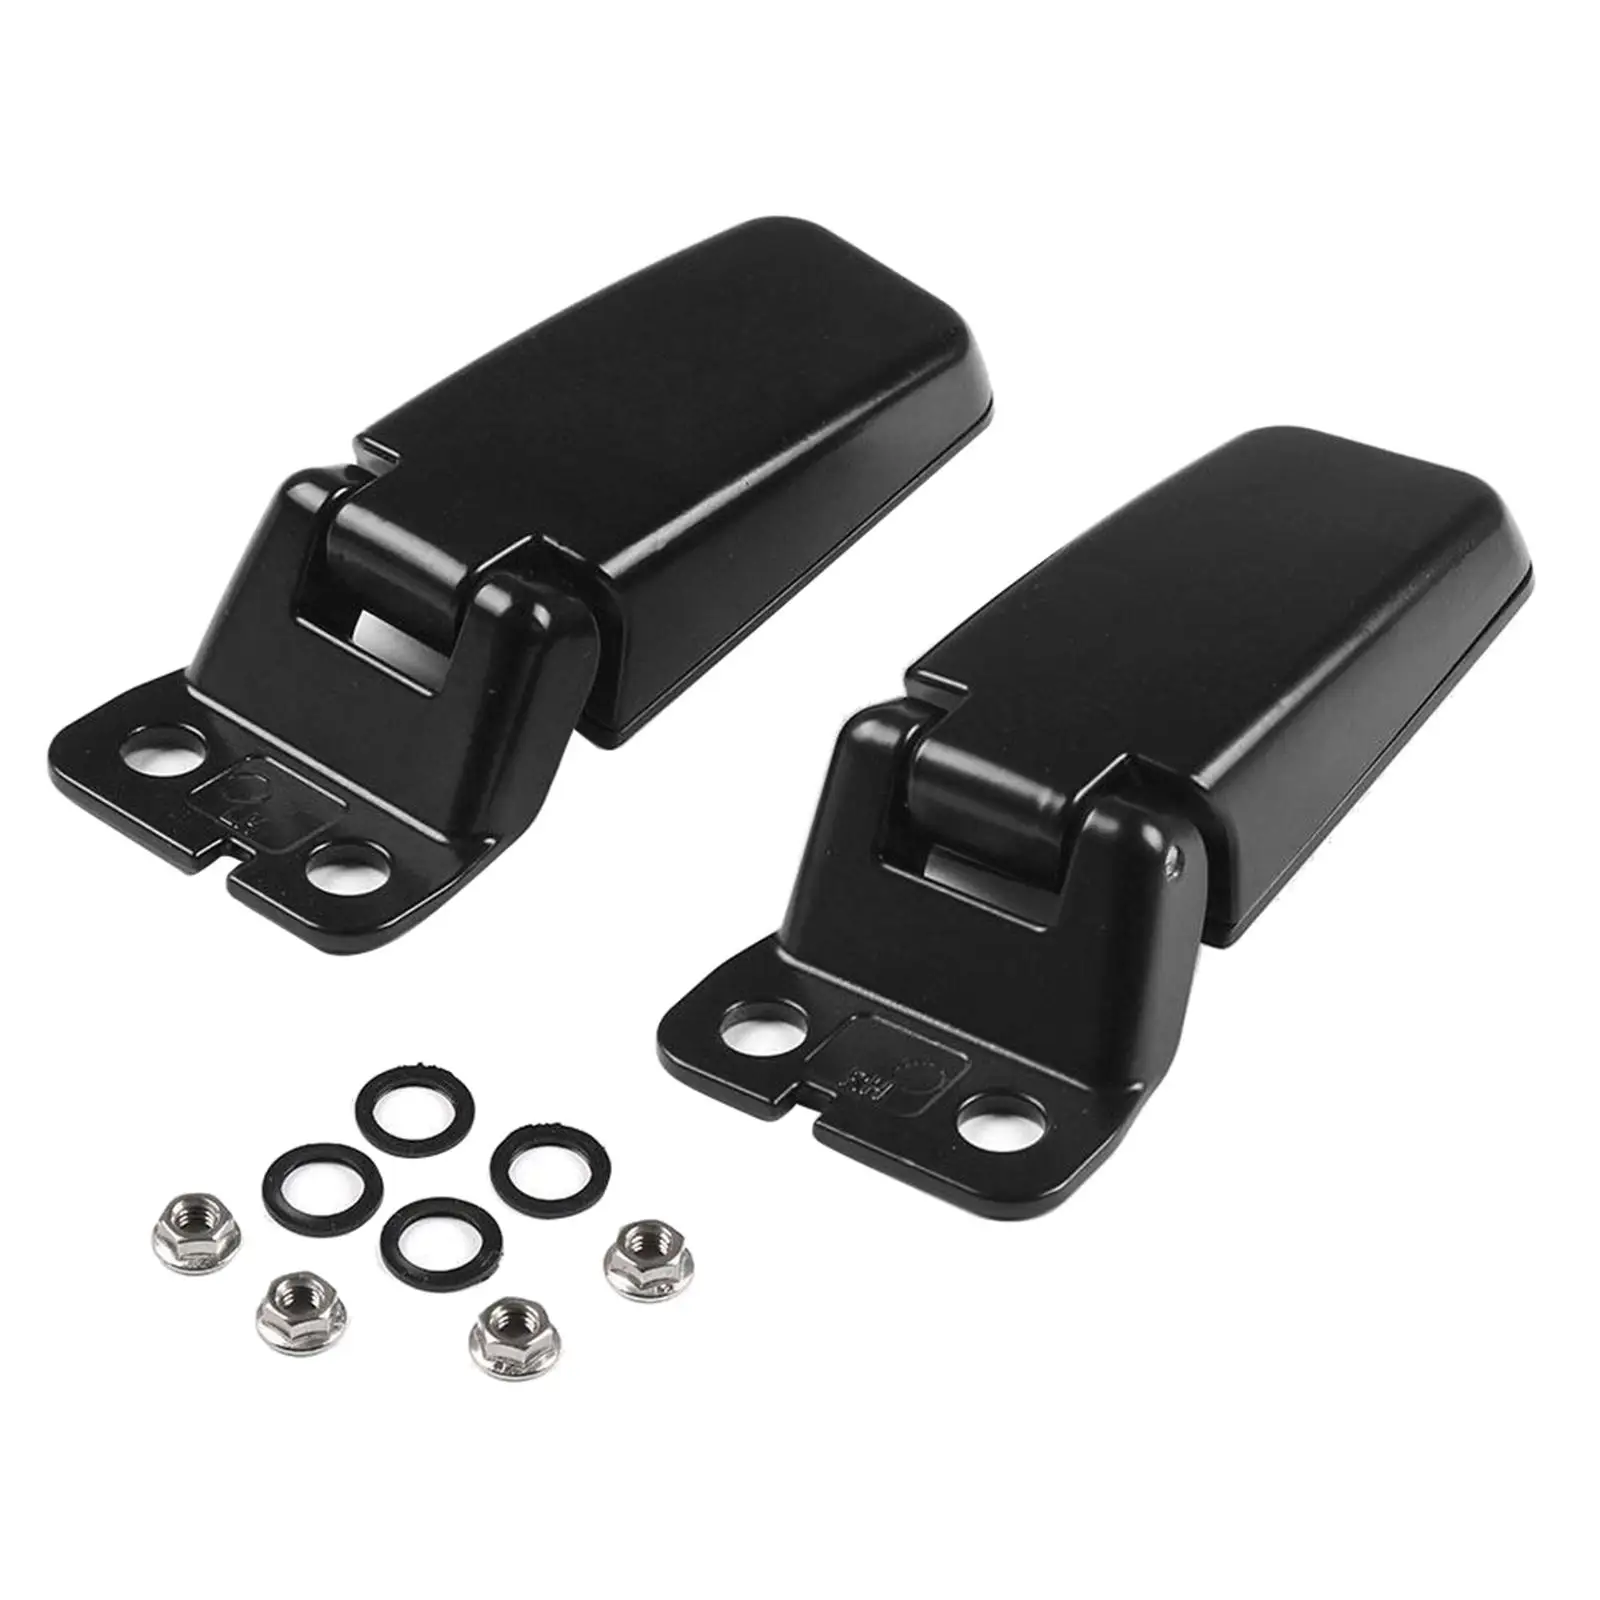 Liftgate Rear Window Hinge Set for 2004-2015 Replaces 903217S000